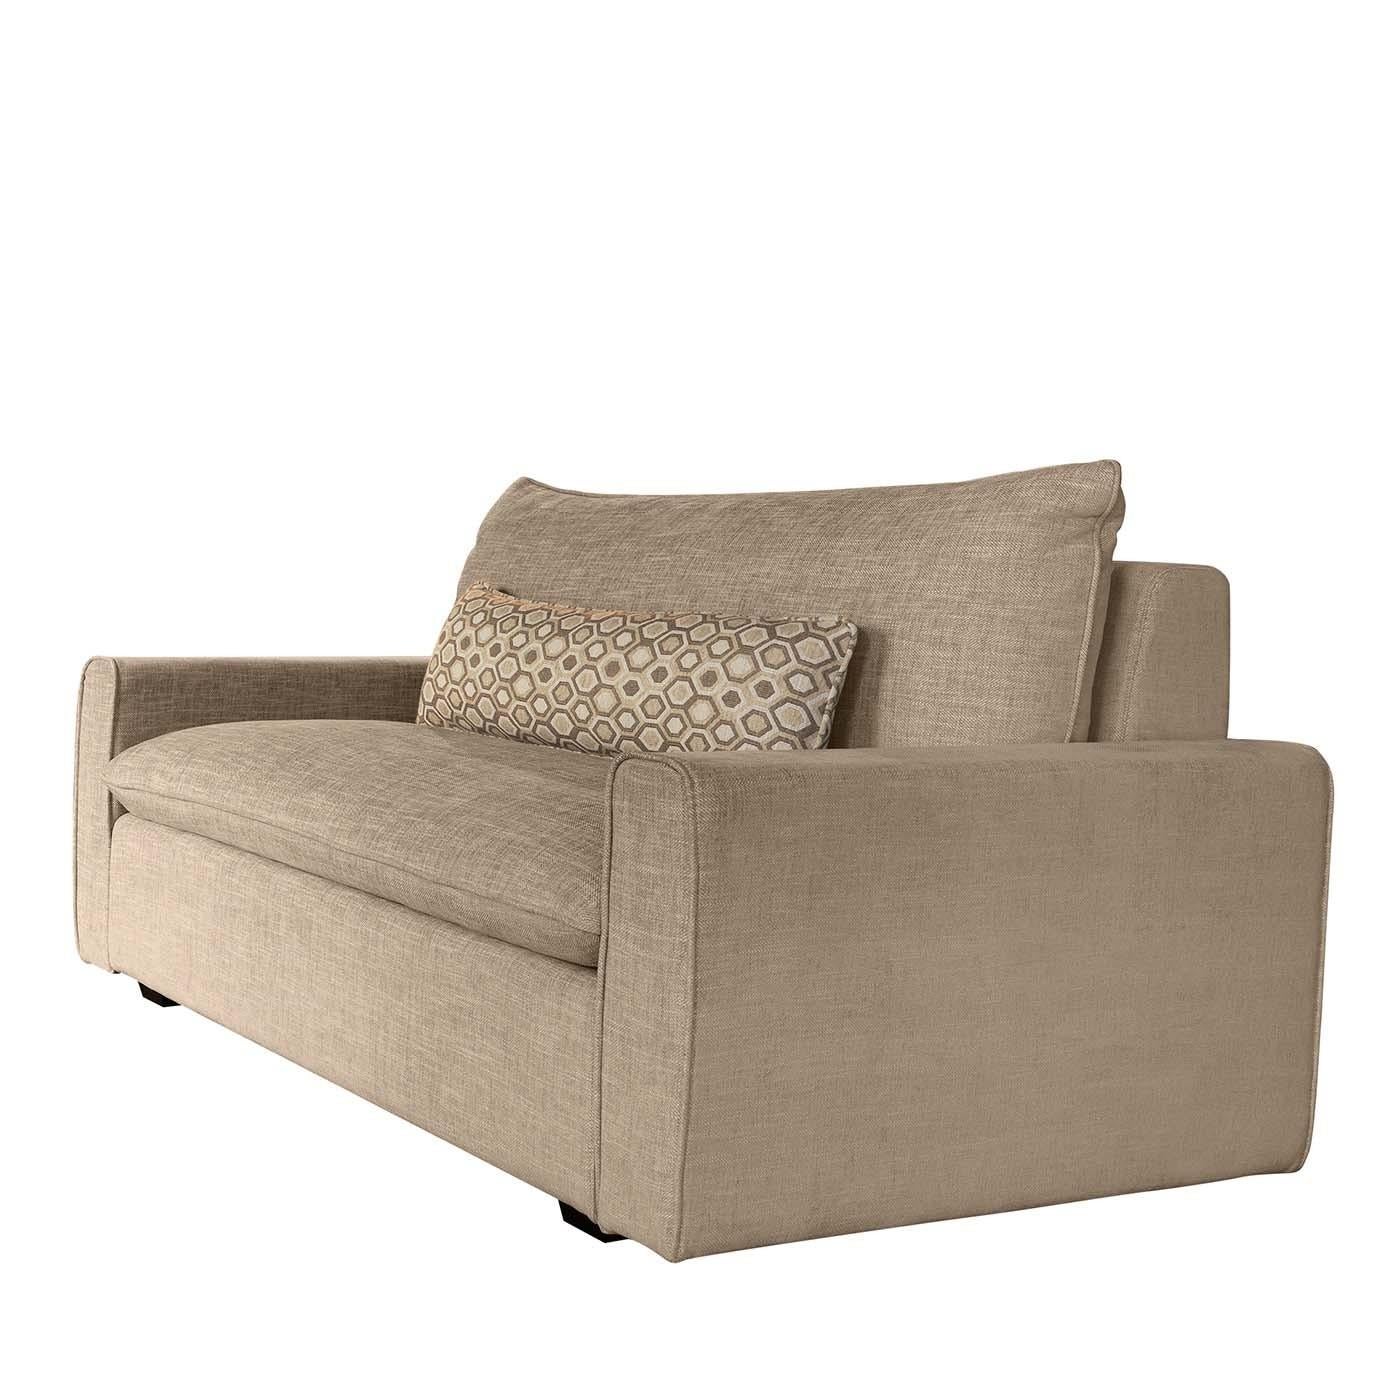 Perfect for small spaces, this loveseat combines elegance and comfort in a superbly-crafted design. The plywood frame is raised on block feet finished in black lacquer that contrasts with the ivory hue of the Dacron fabric covering. The frame is